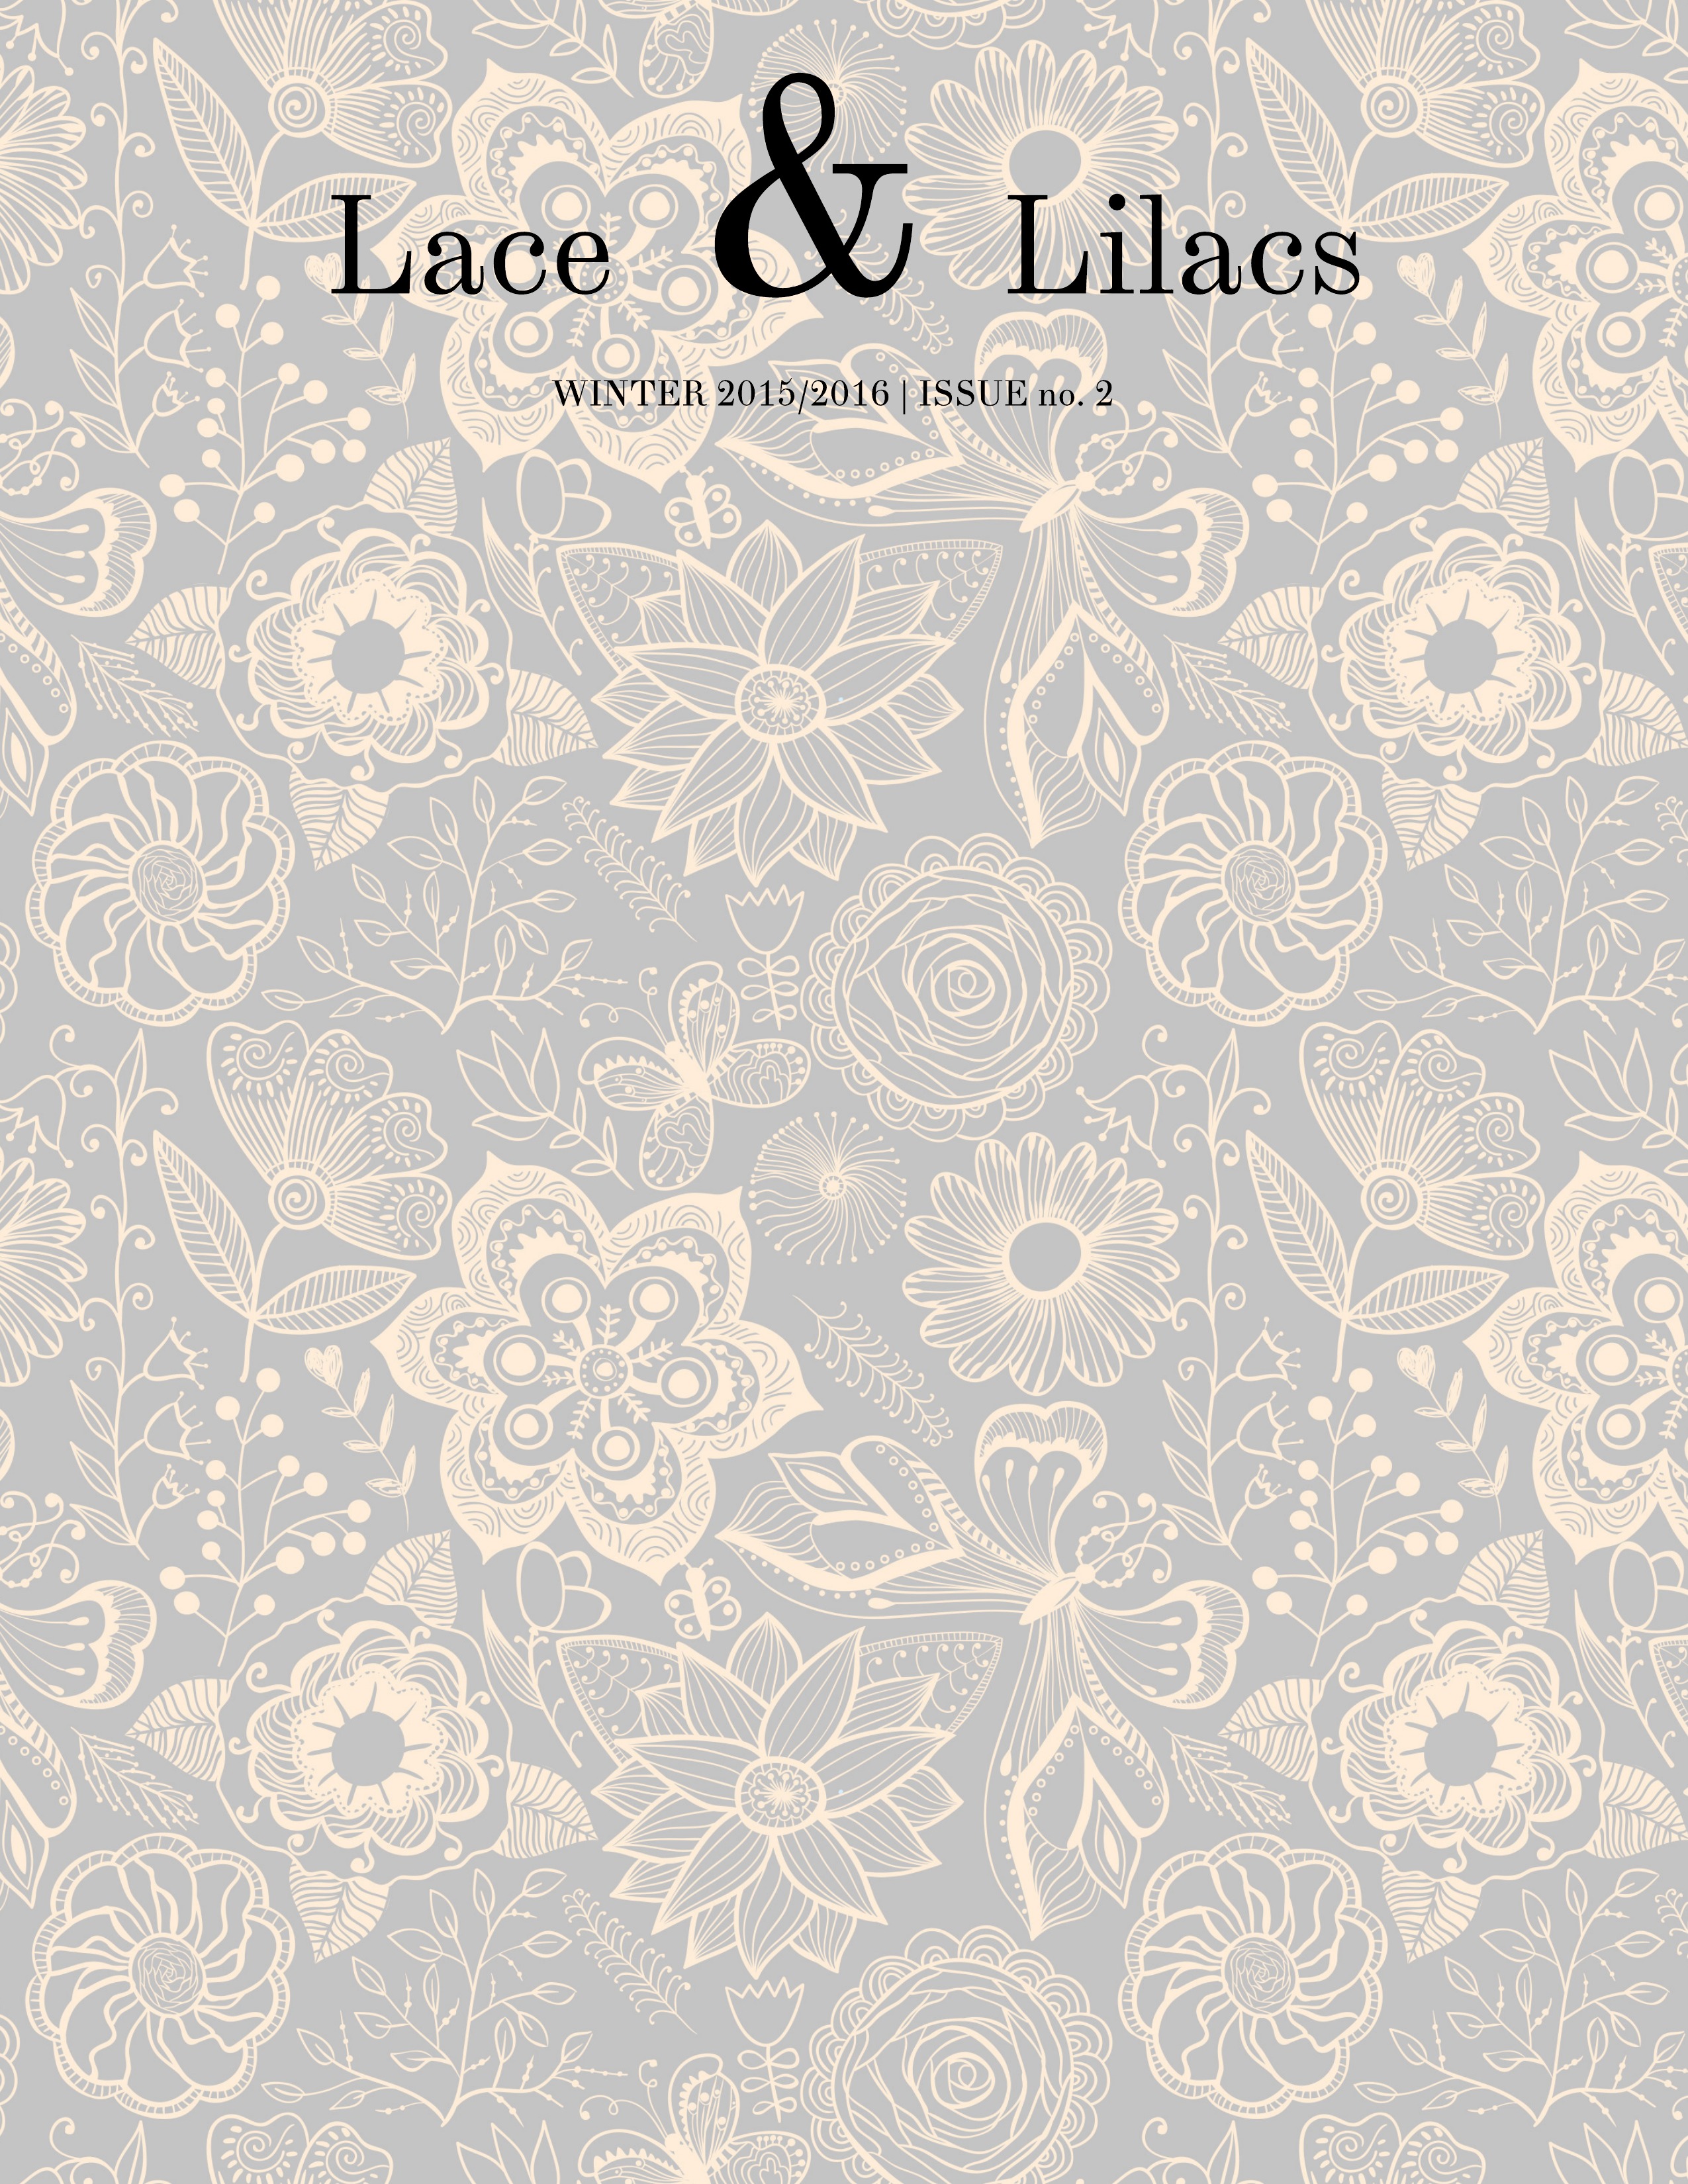 The Lace & Lilacs Magazine (Issue #2) - Cover